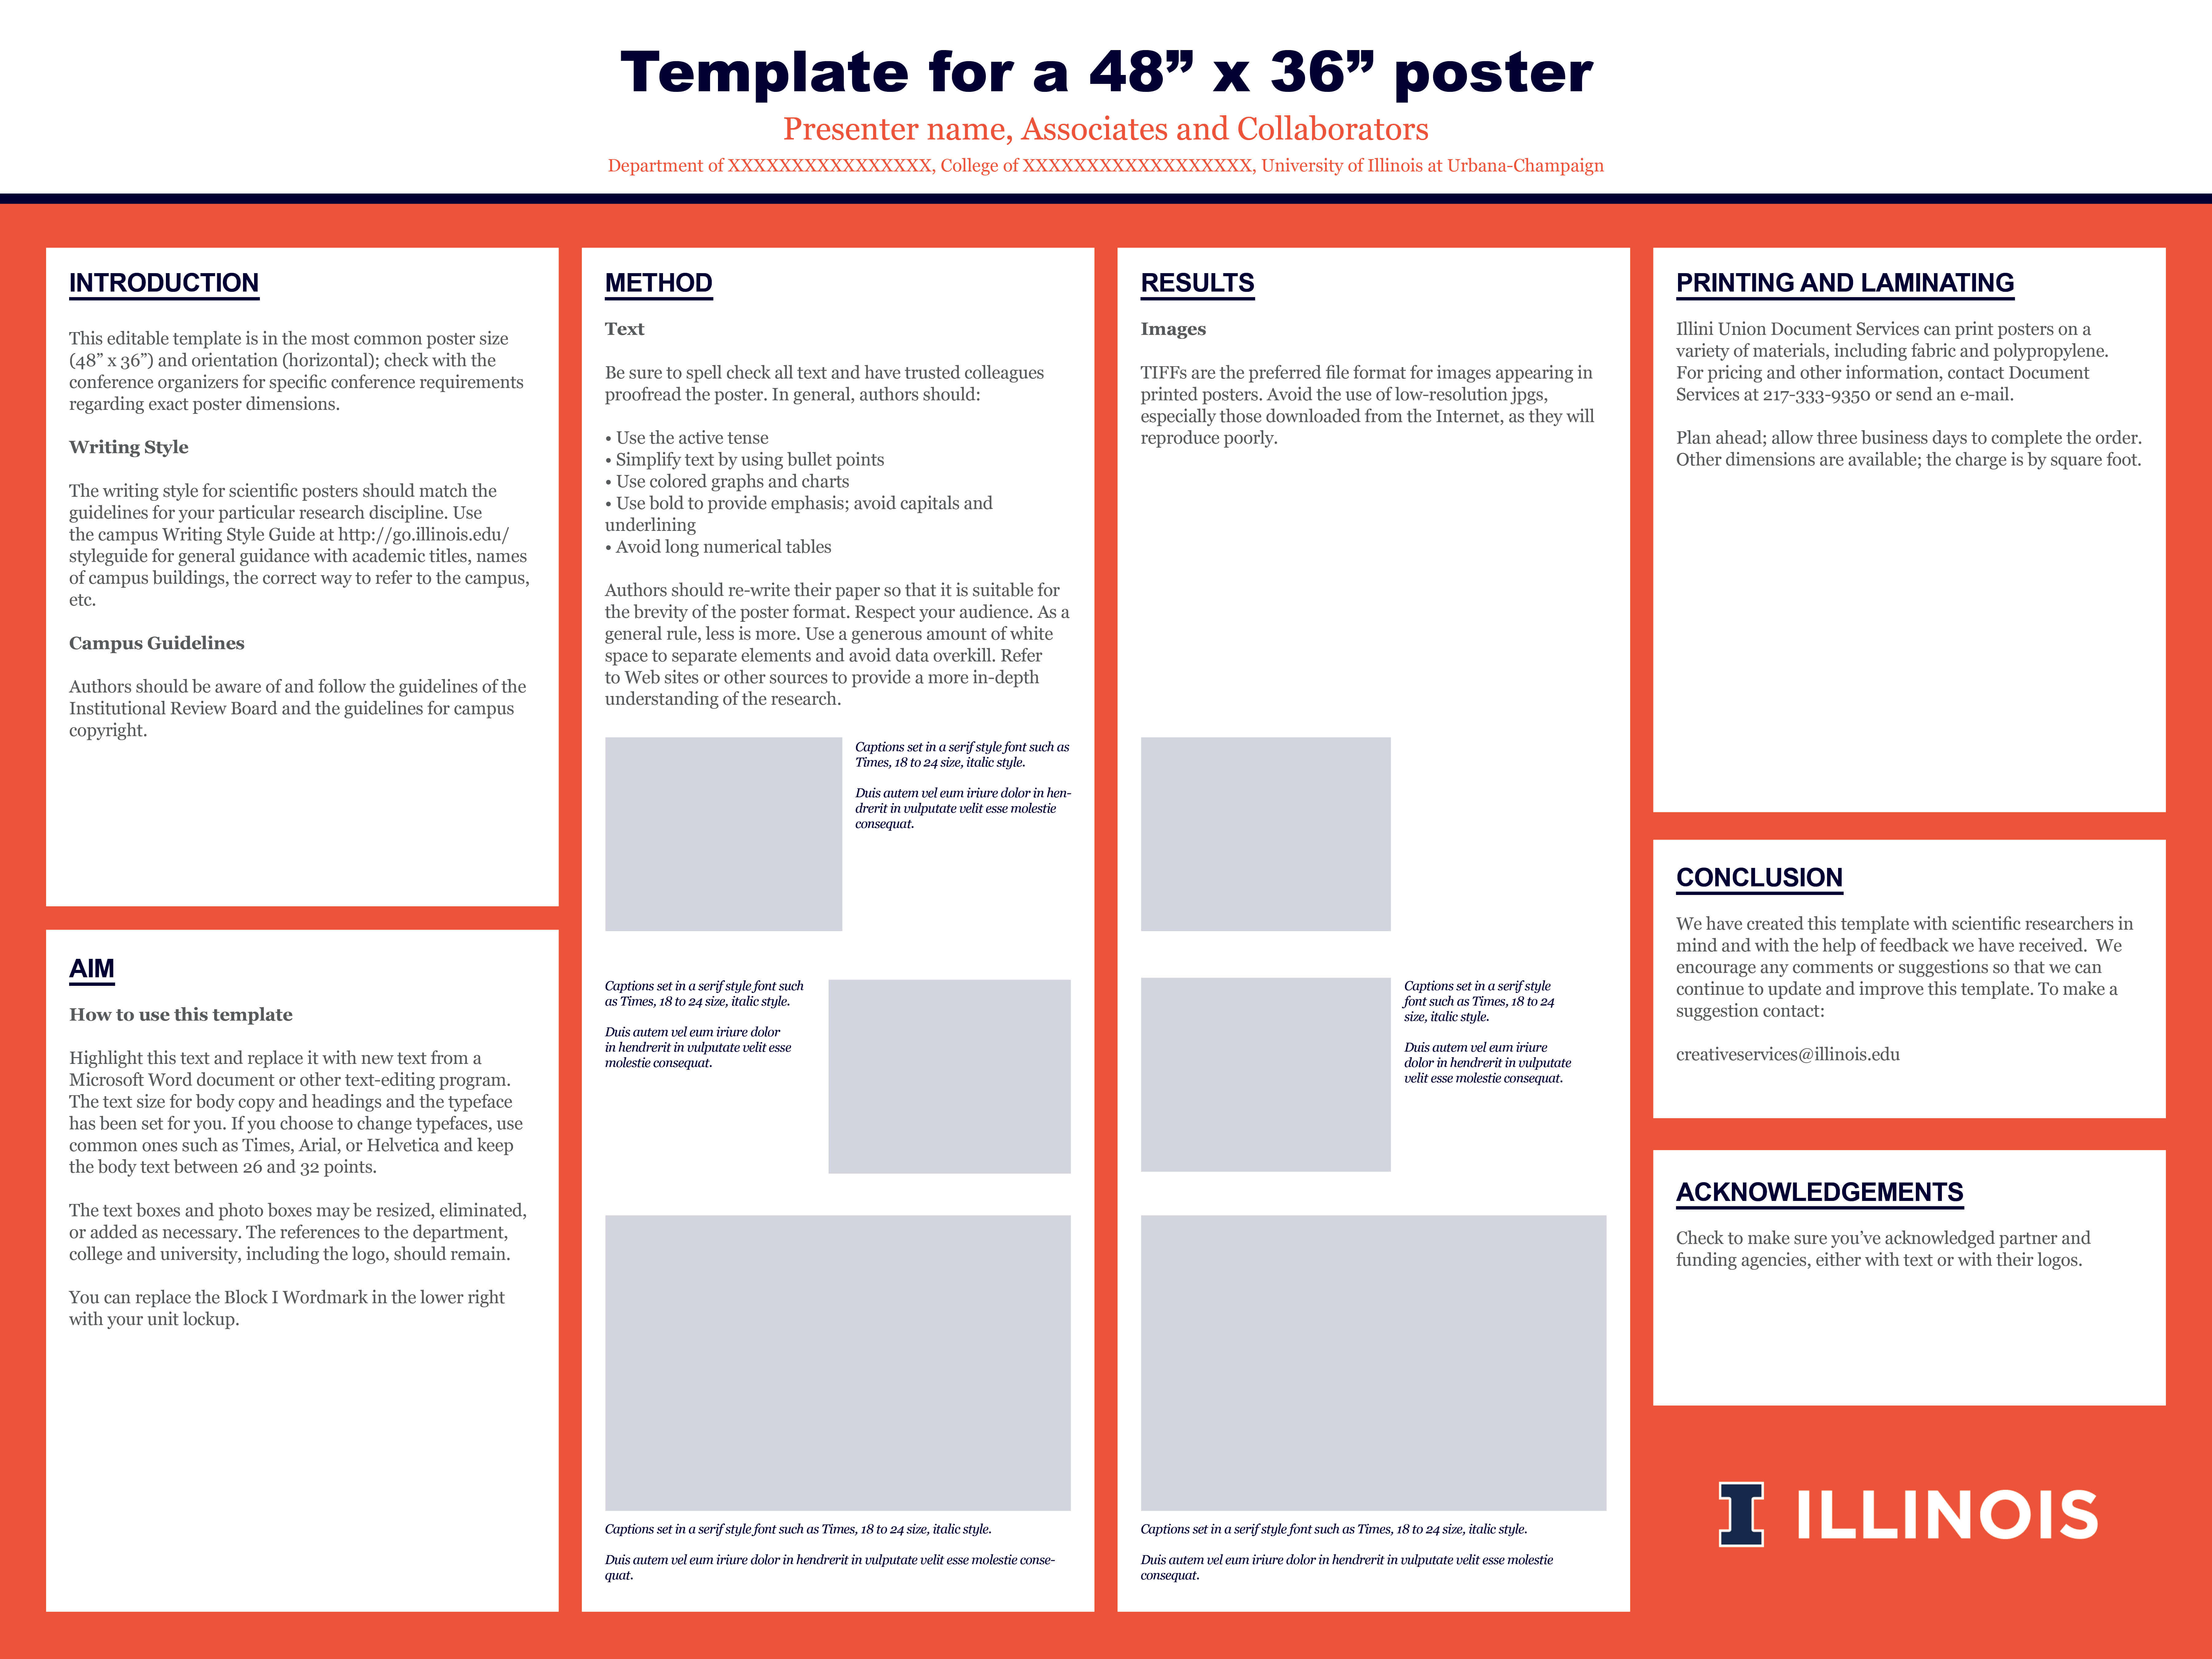 Research Poster | Campus Templates | Public Affairs | Illinois For Powerpoint Presentation Template Size